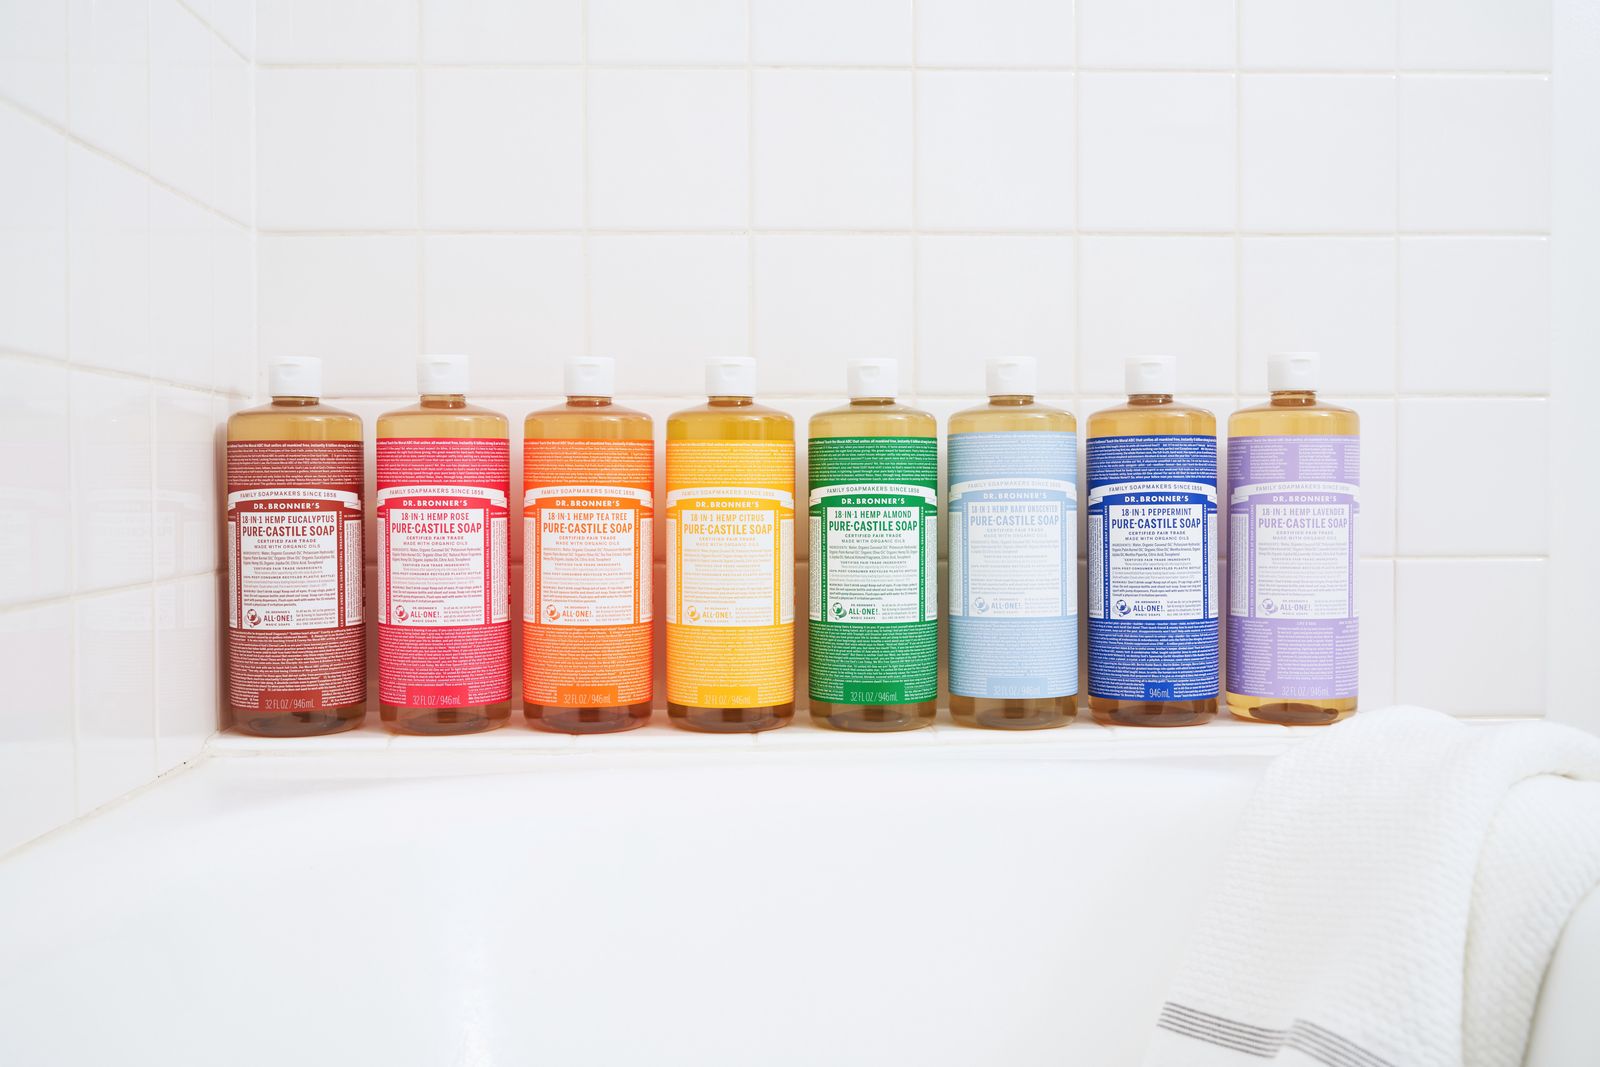 Top Uses of Dr. Bronner's Castile Soap